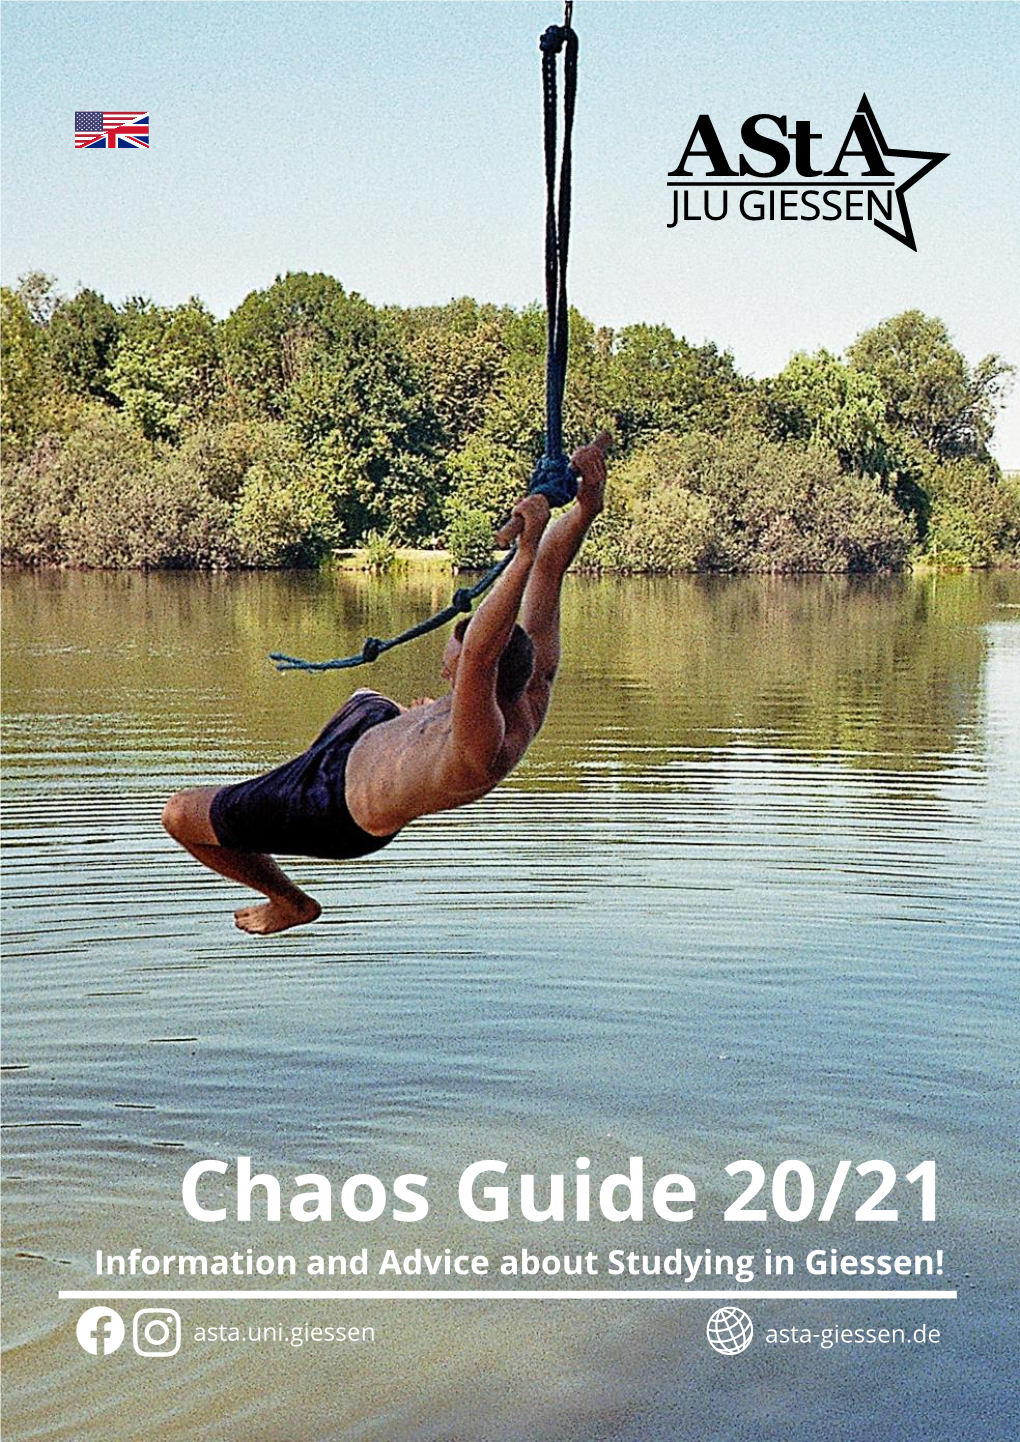 Chaos Guide 20/21 Information and Advice About Studying in Giessen!